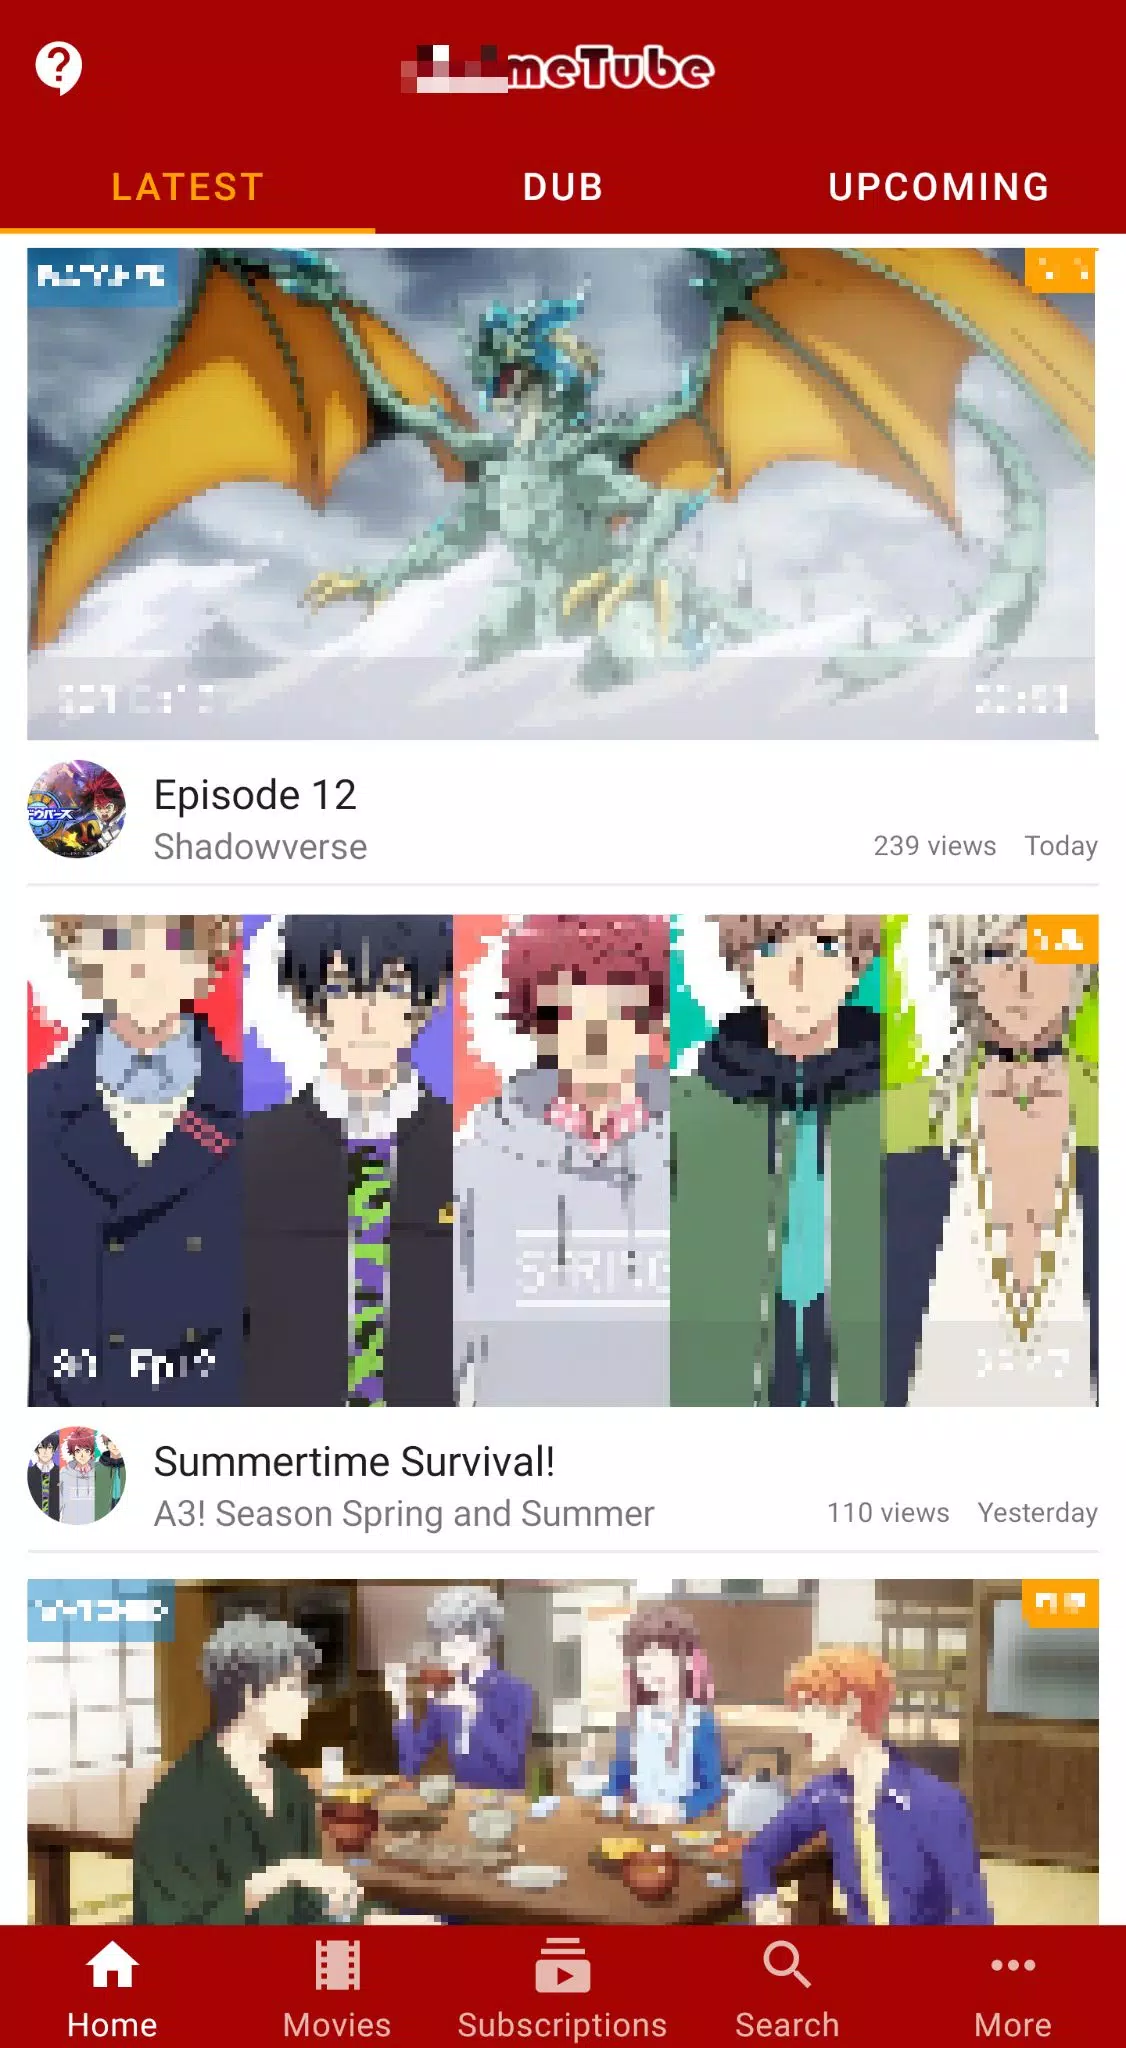 Anime Fanz APK (Android App) - Free Download